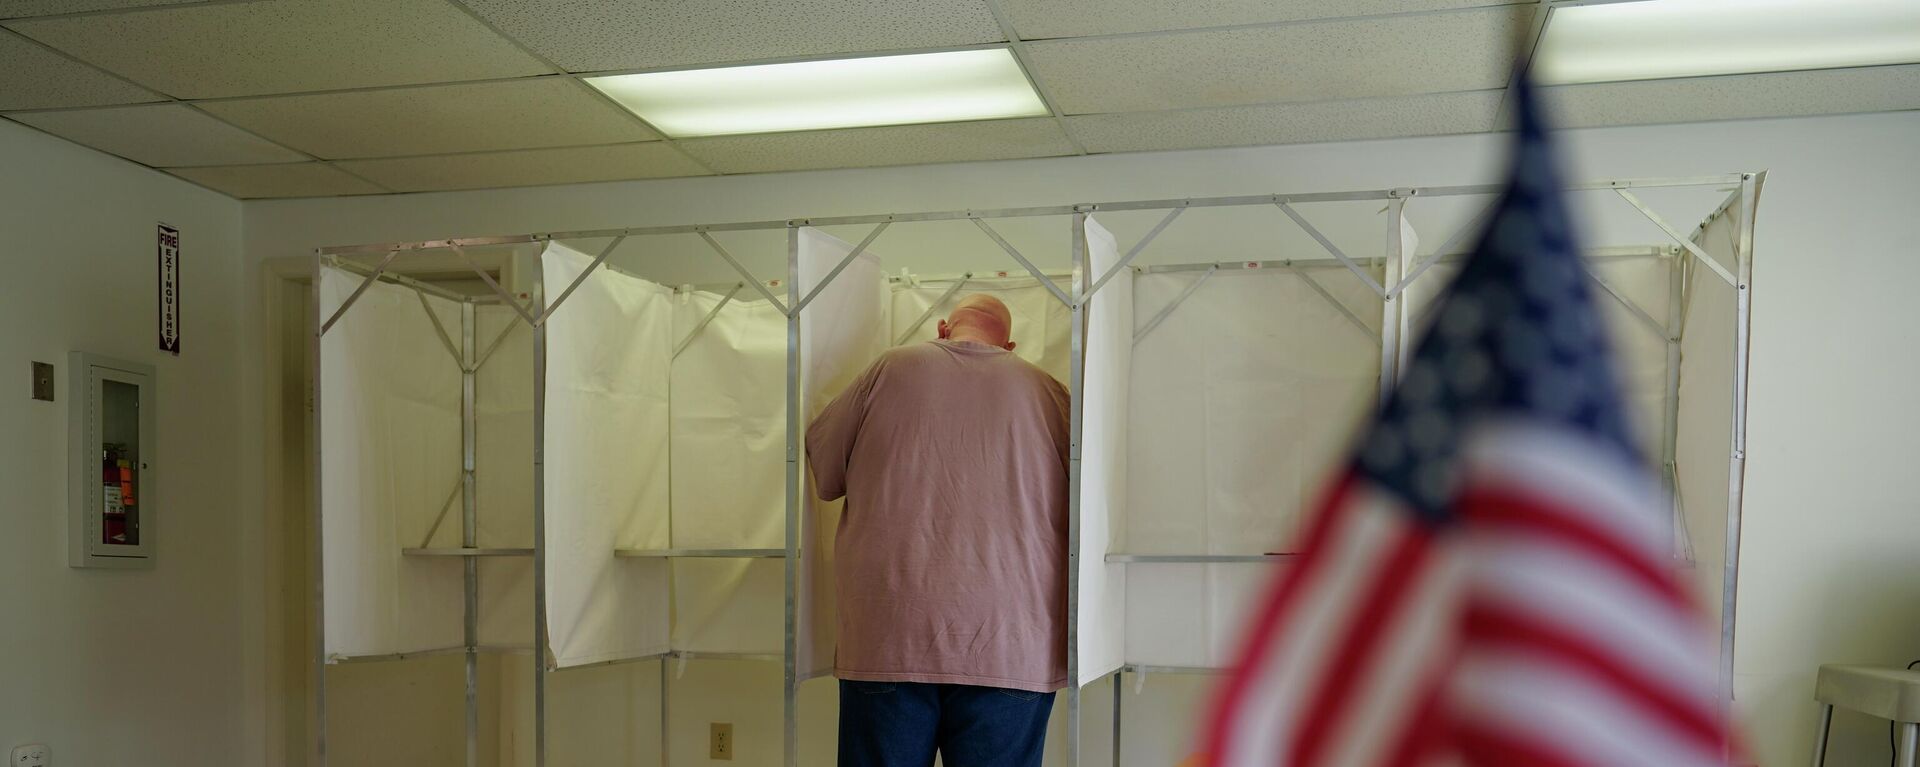 FILE - A voter fills out a ballot during the Pennsylvania primary election at the Michaux Manor Living Center in Fayetteville, Pa., May 17, 2022. As the 2022 midterm elections enter their final two-month sprint, leading Republicans concede that their party's advantage may be slipping even as Democrats confront their president's weak standing, deep voter pessimism and the weight of history this fall. - Sputnik International, 1920, 21.11.2022